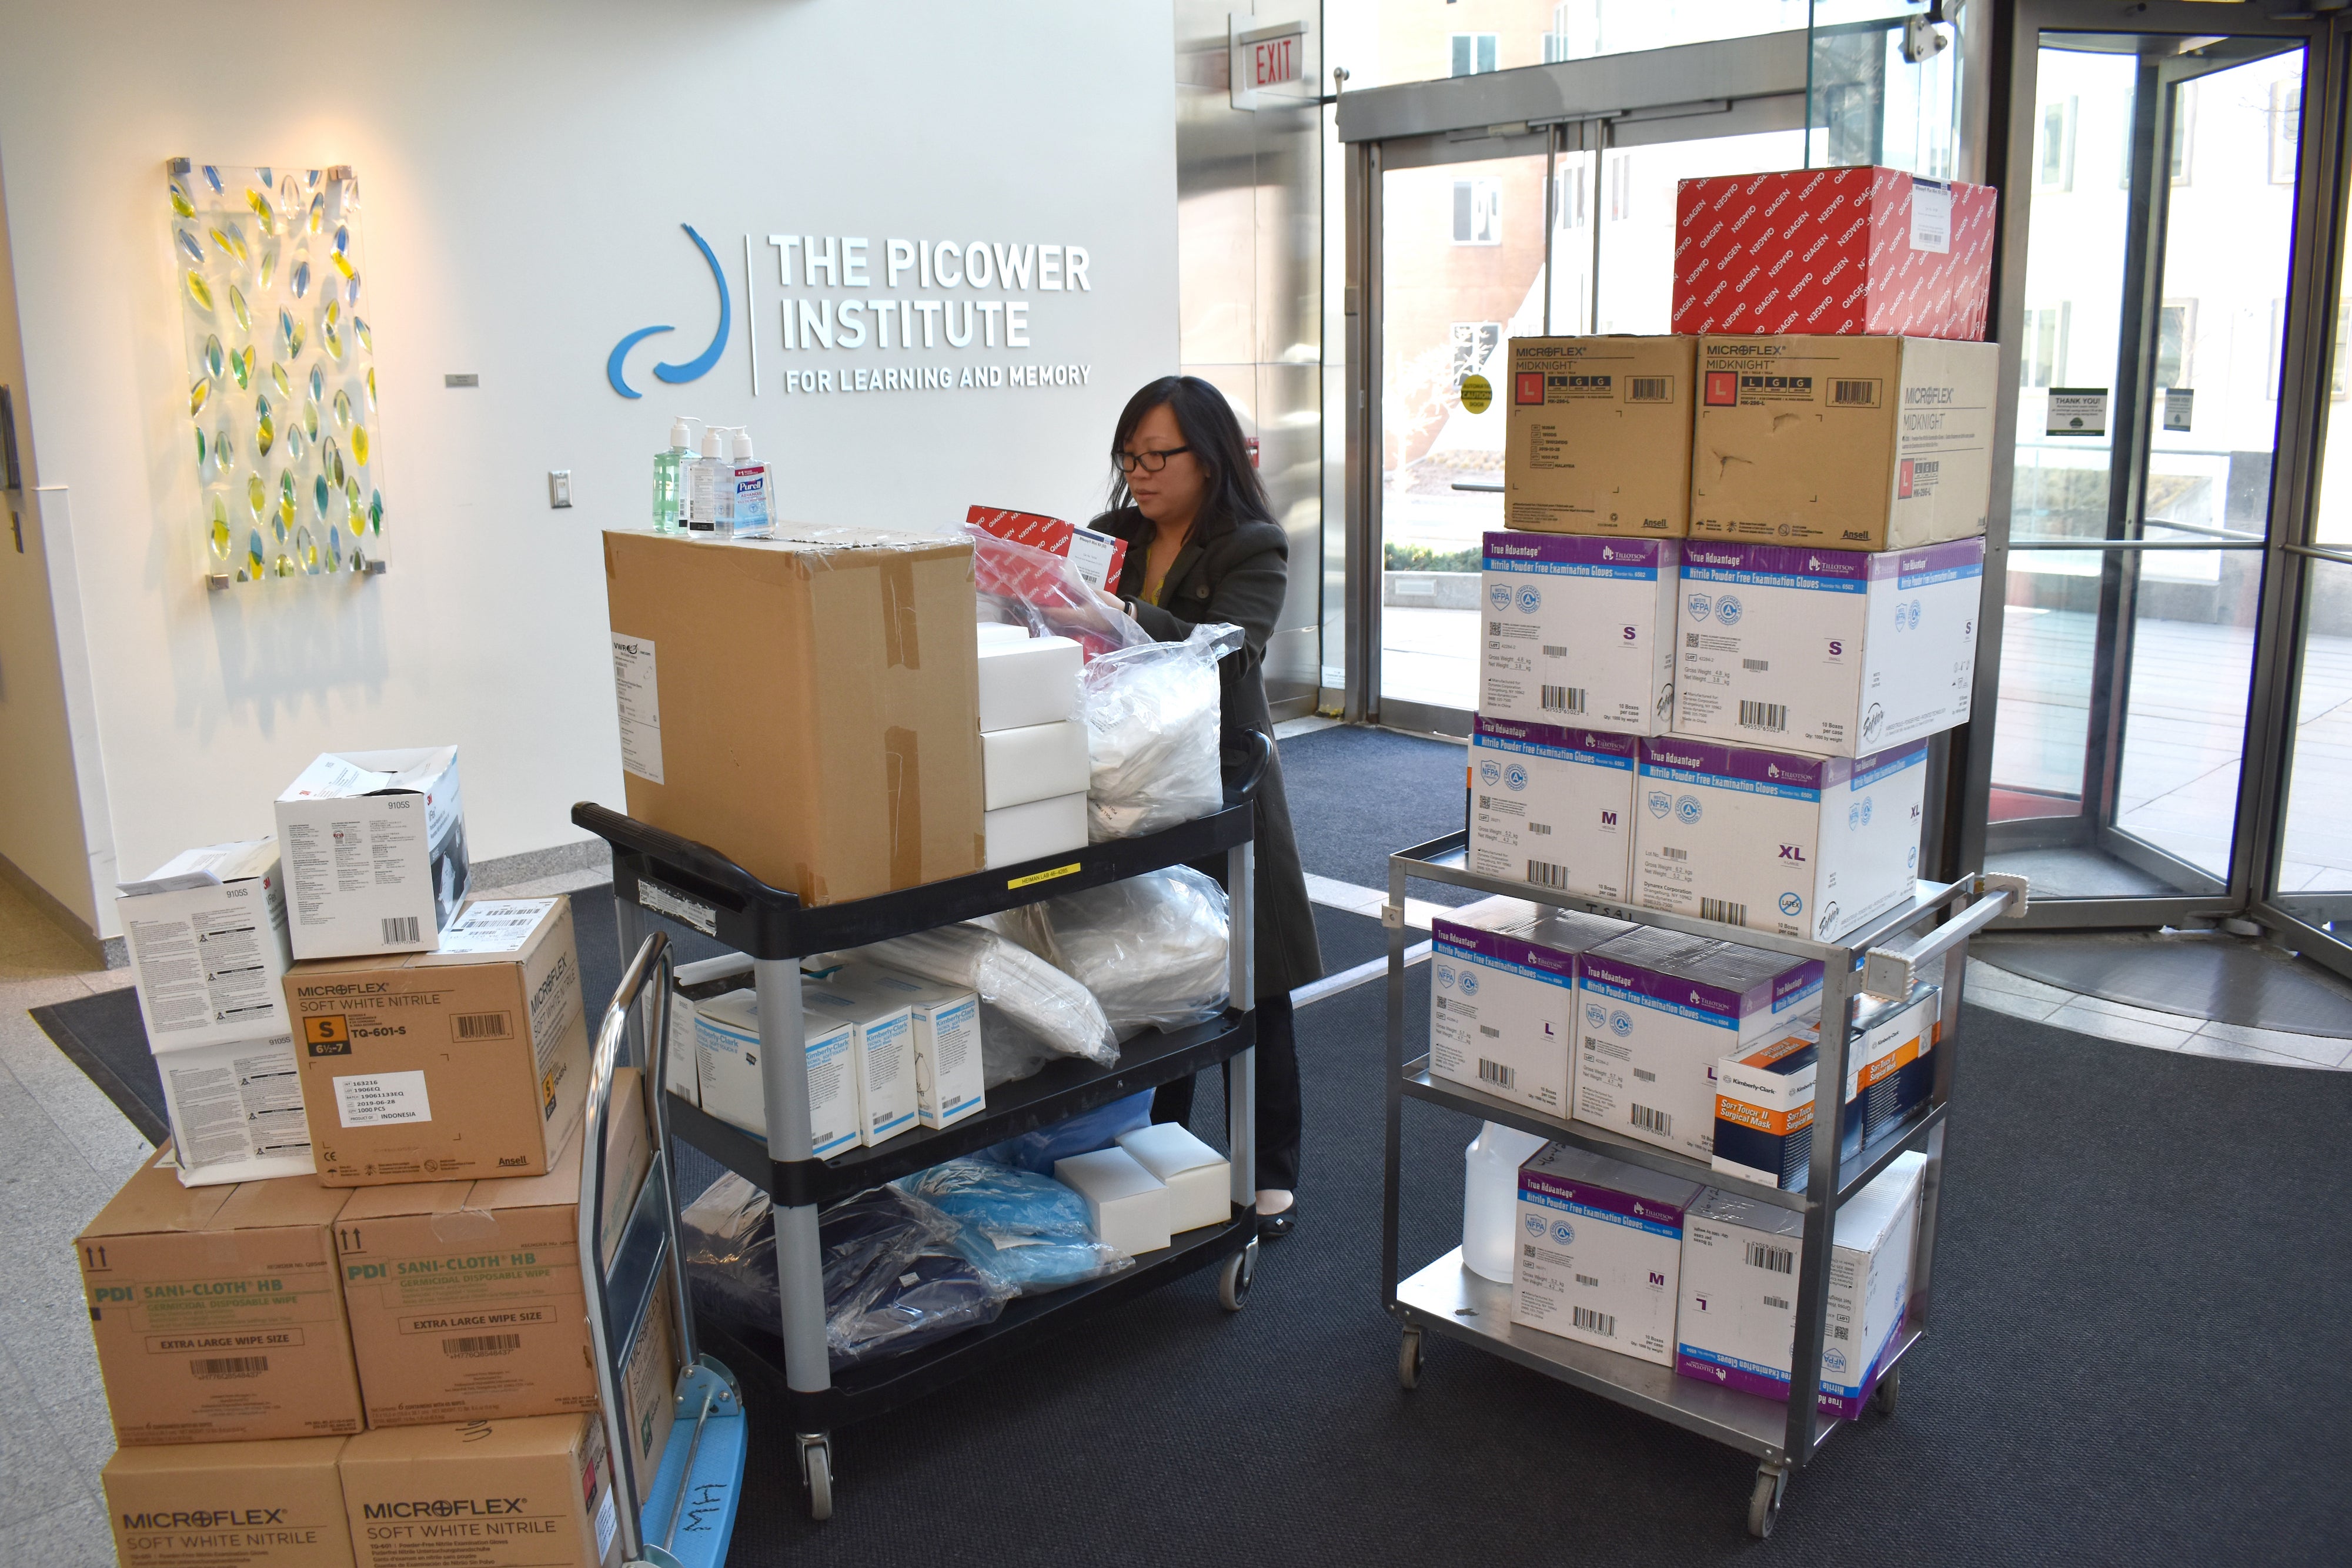 Chan in her building at MIT collecting supplies to donate to MGH during March 2020 of the pandemic when supplies were low.